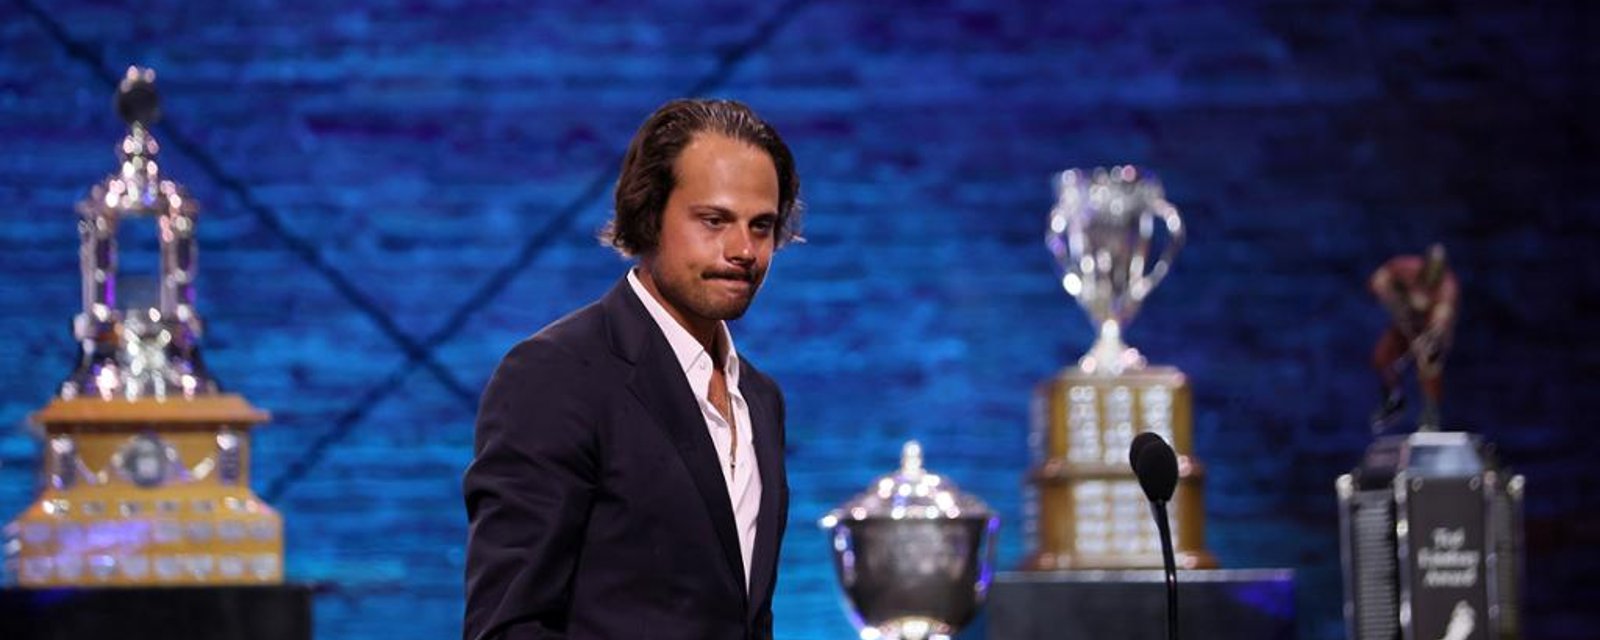 Auston Matthews and Leafs get humiliated in last minute of NHL awards